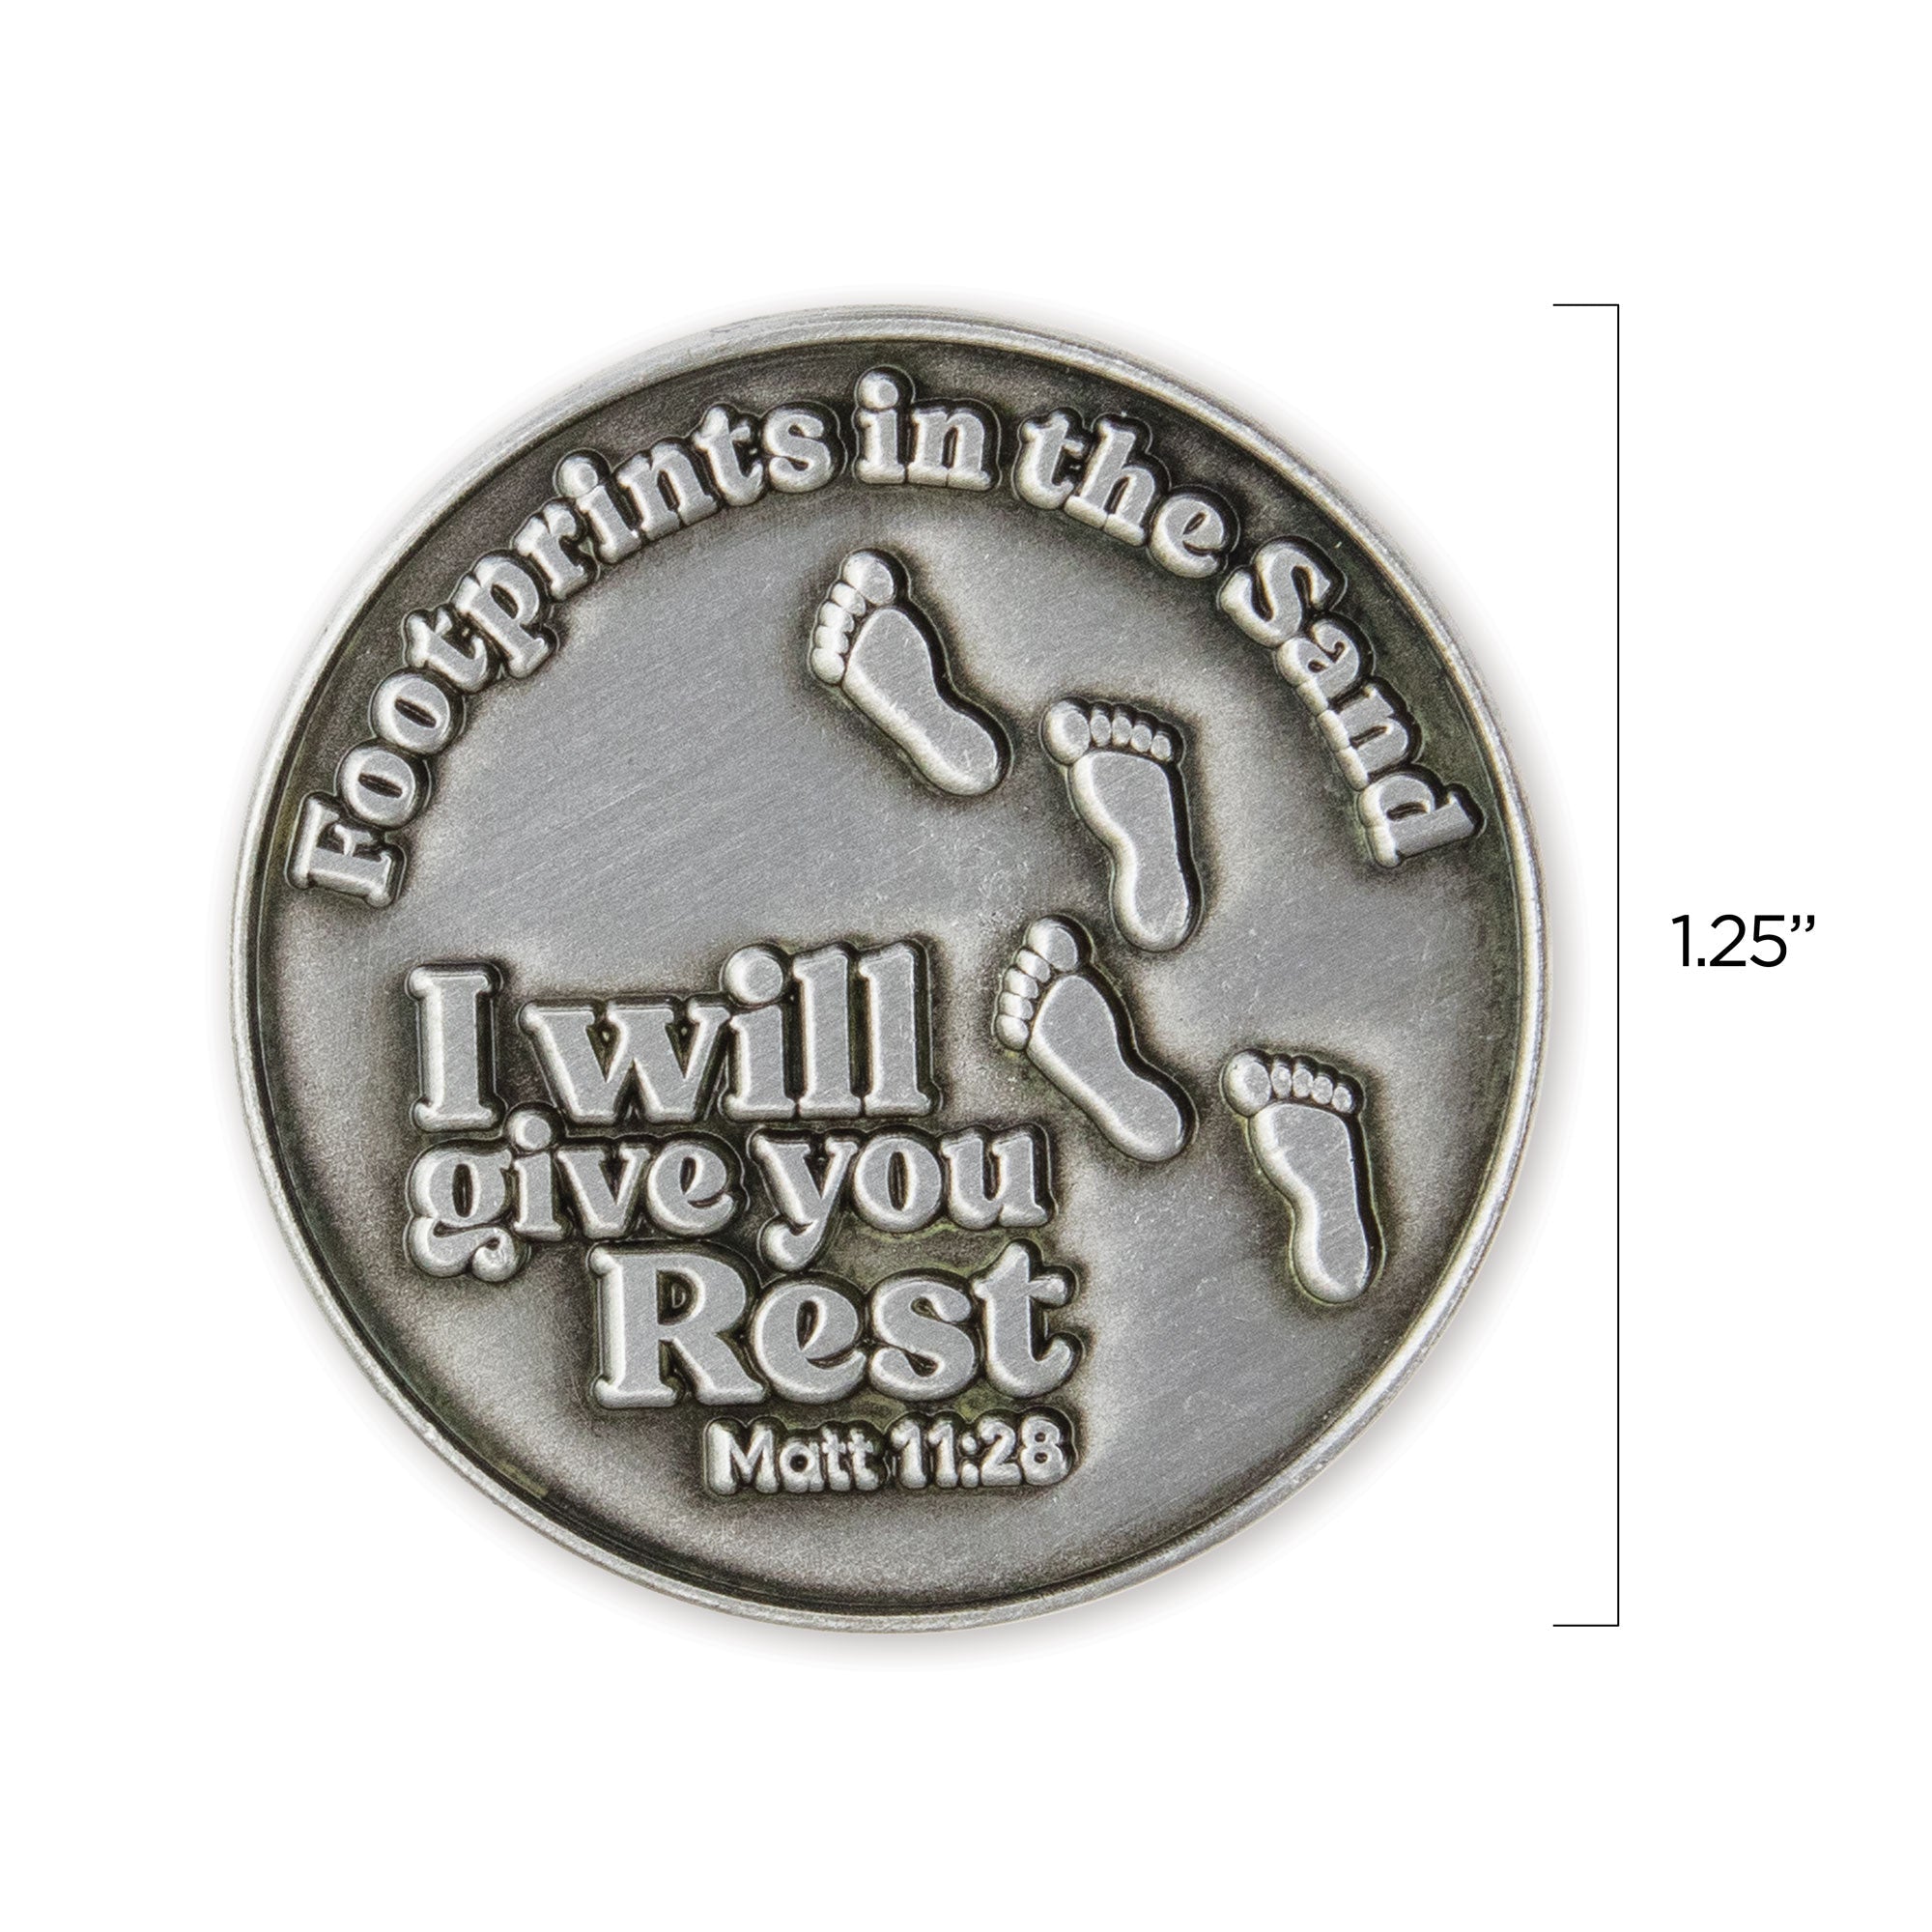 Footprints in the Sand Love Expression Coin